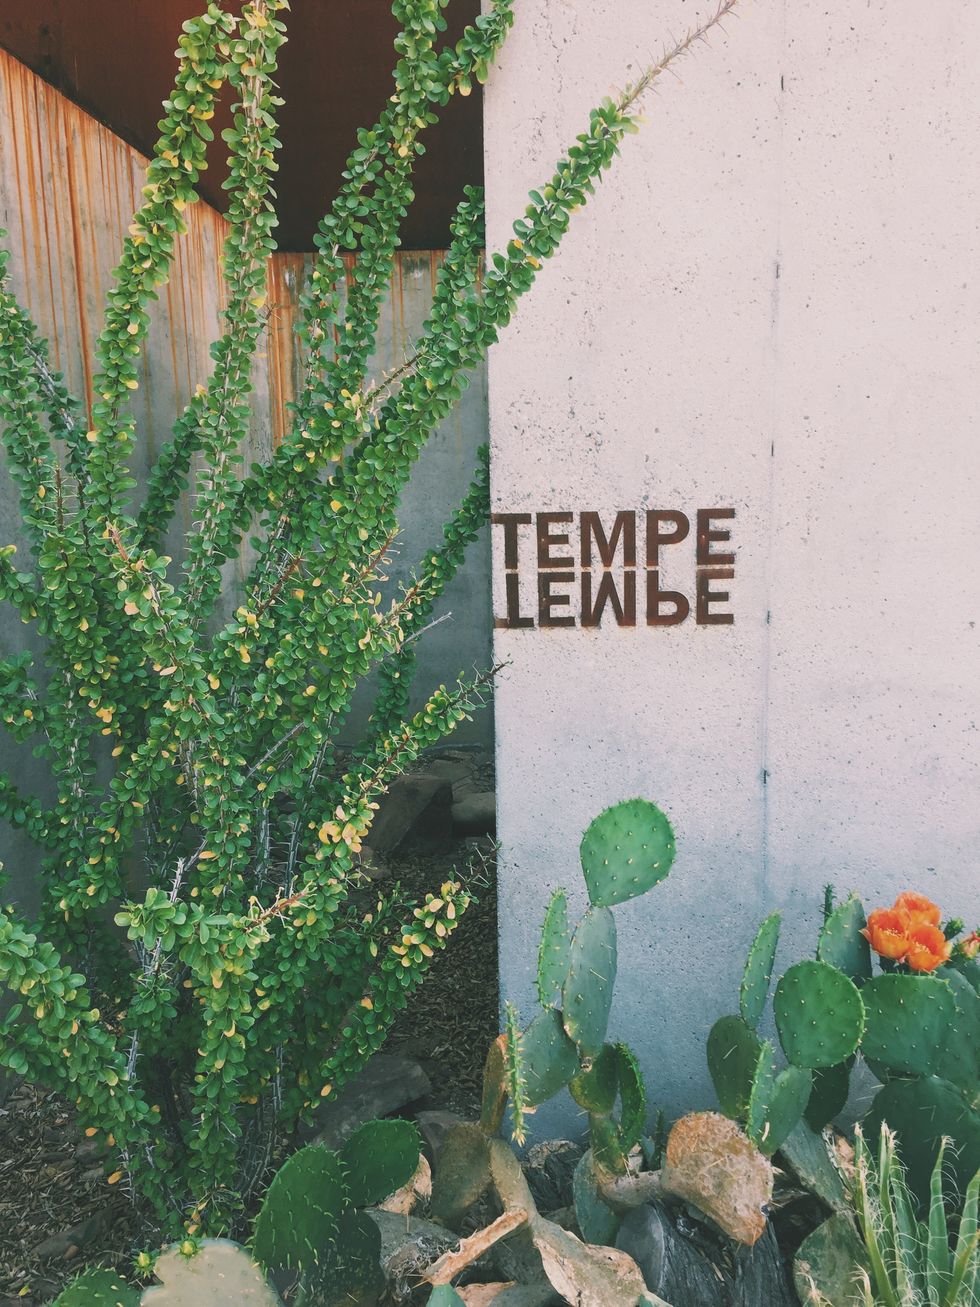 My 5 Favorite Spaces In Tempe, AZ